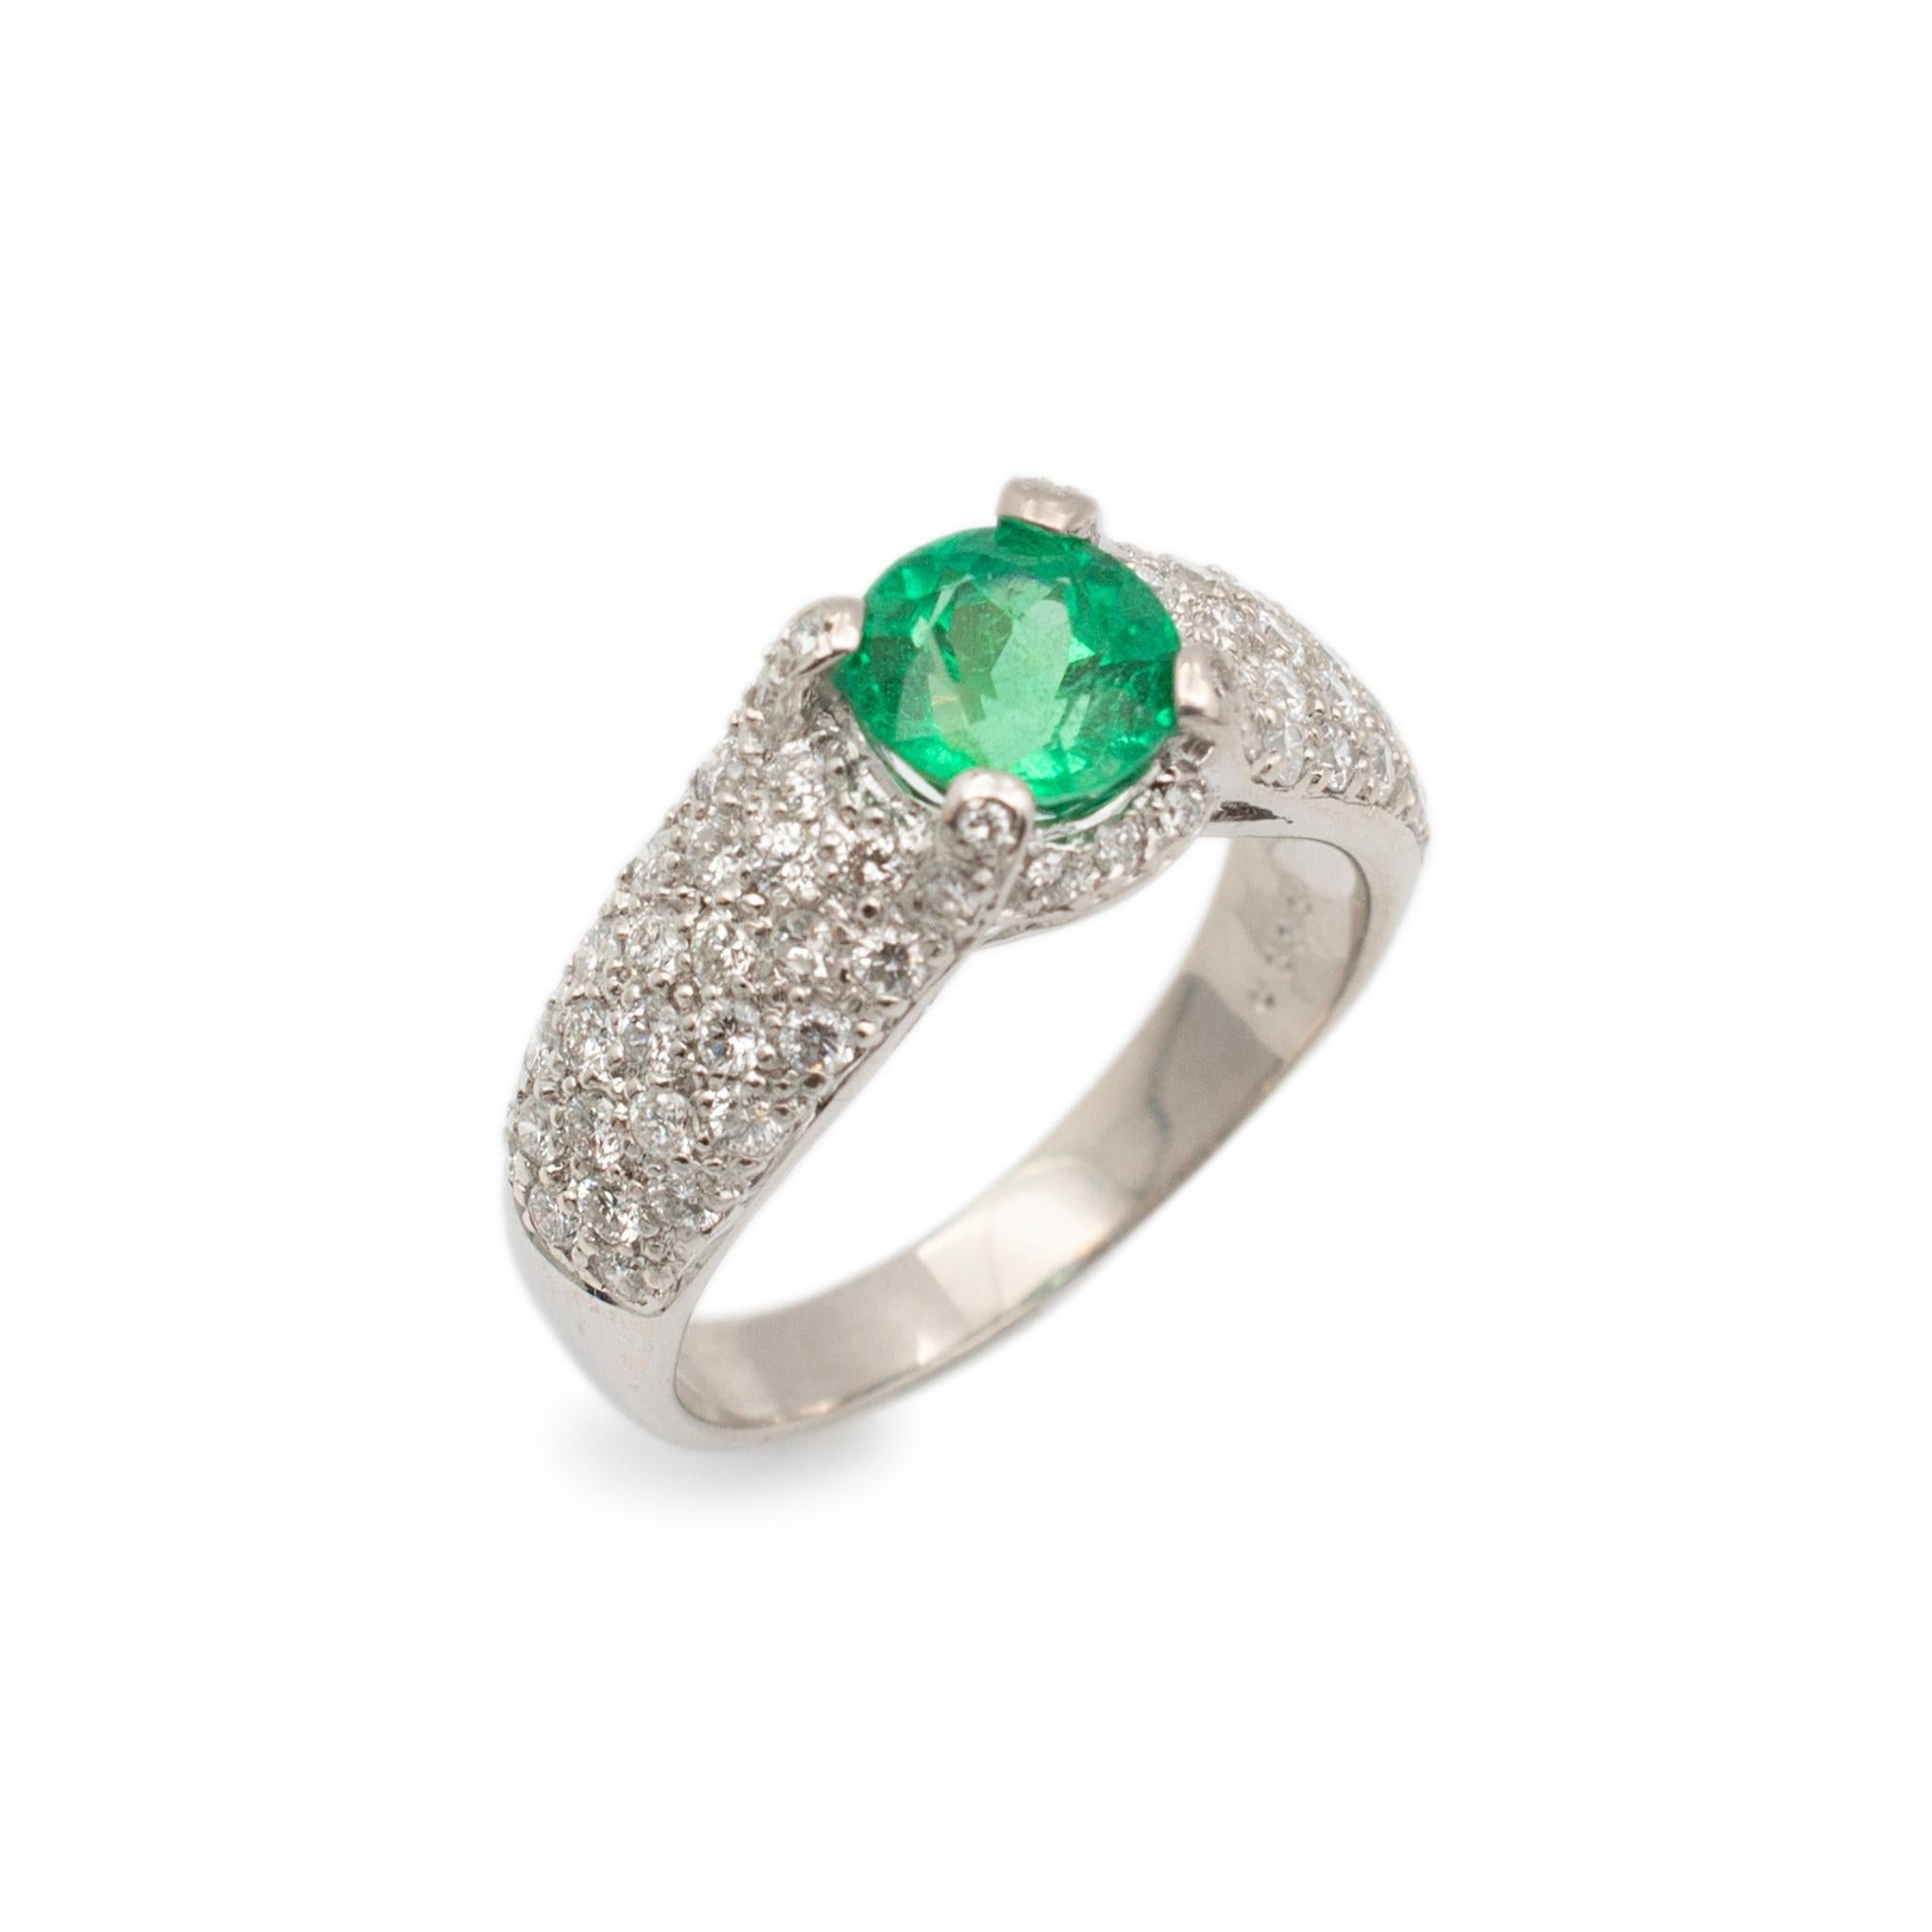 Gender: Ladies

Metal Type: 18K White Gold

Size: 7

Shank Maximum Width: 8.40 mm tapering to 2.95 mm

Weight: 6.02 grams

Ladies 18K white gold diamond and emerald cocktail ring with a half round shank. Engraved with 